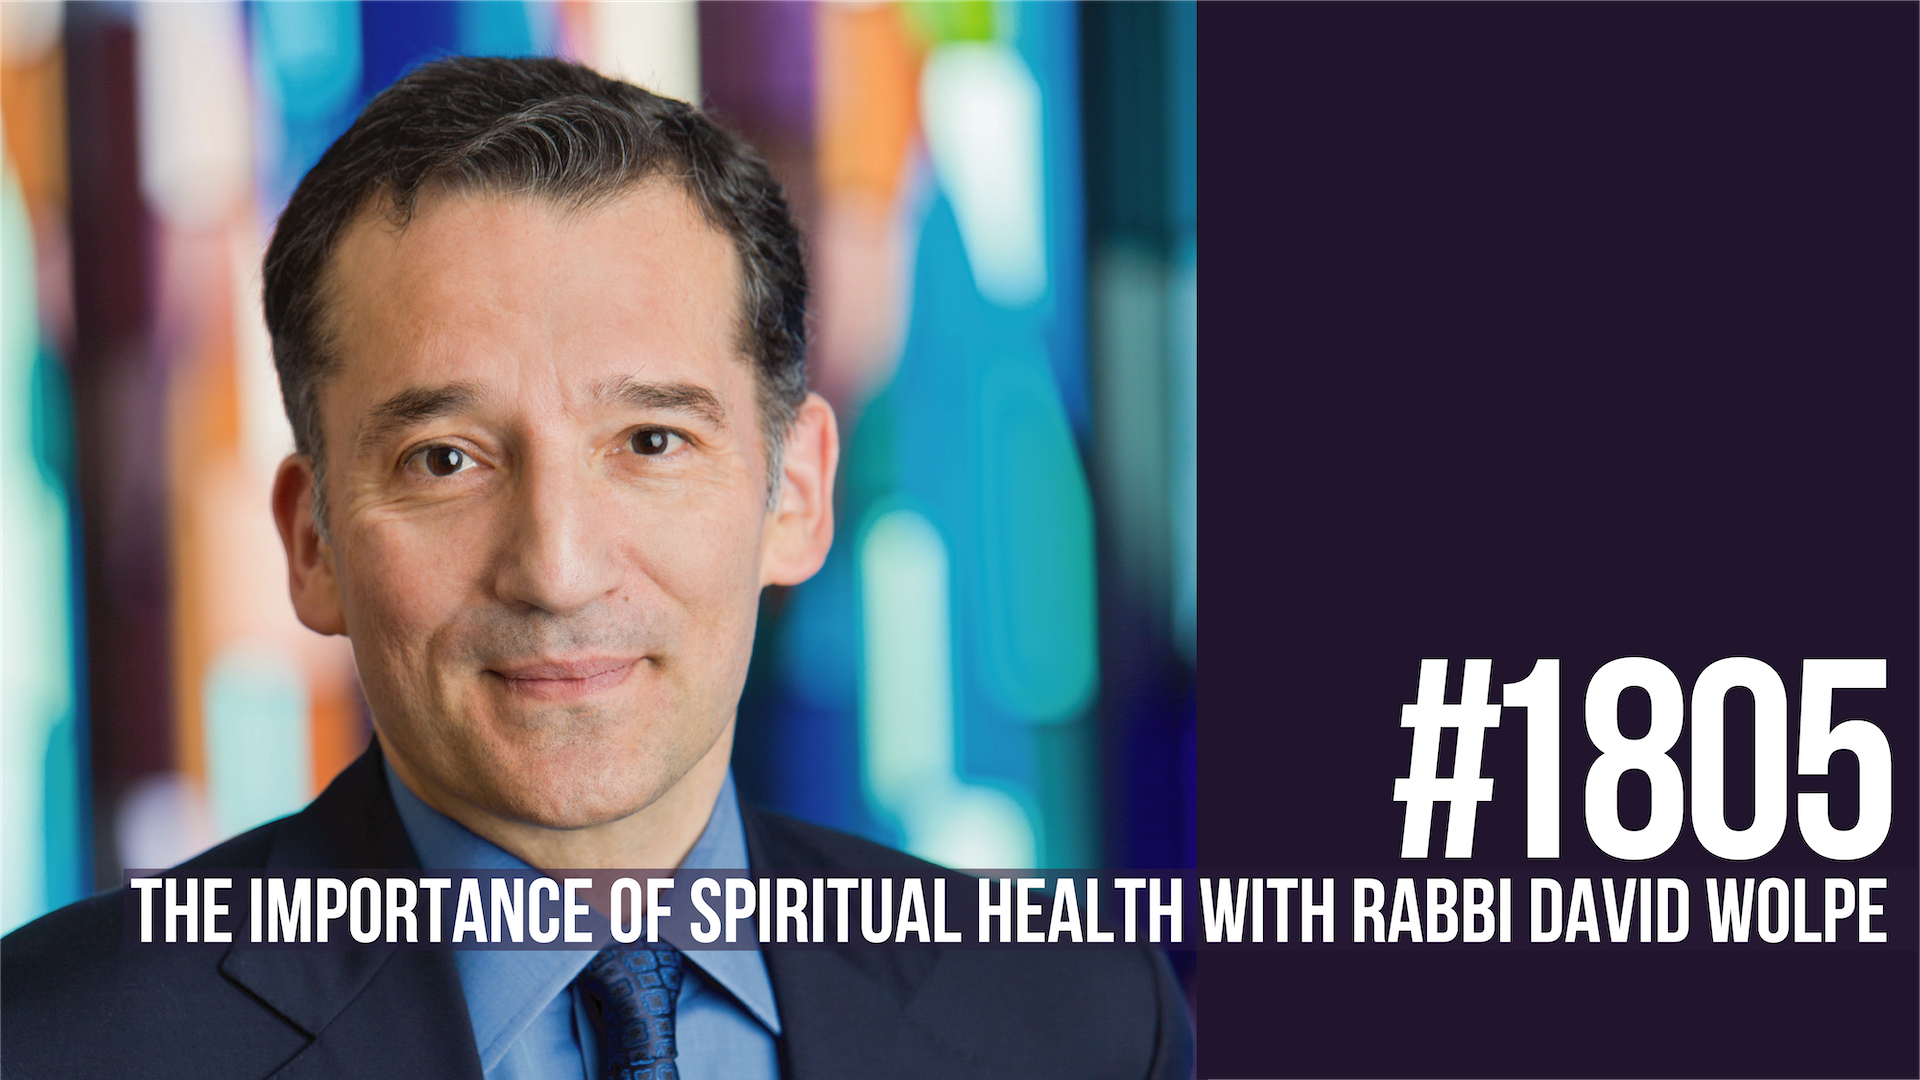 1805: The Importance of Spiritual Health With Rabbi David Wolpe